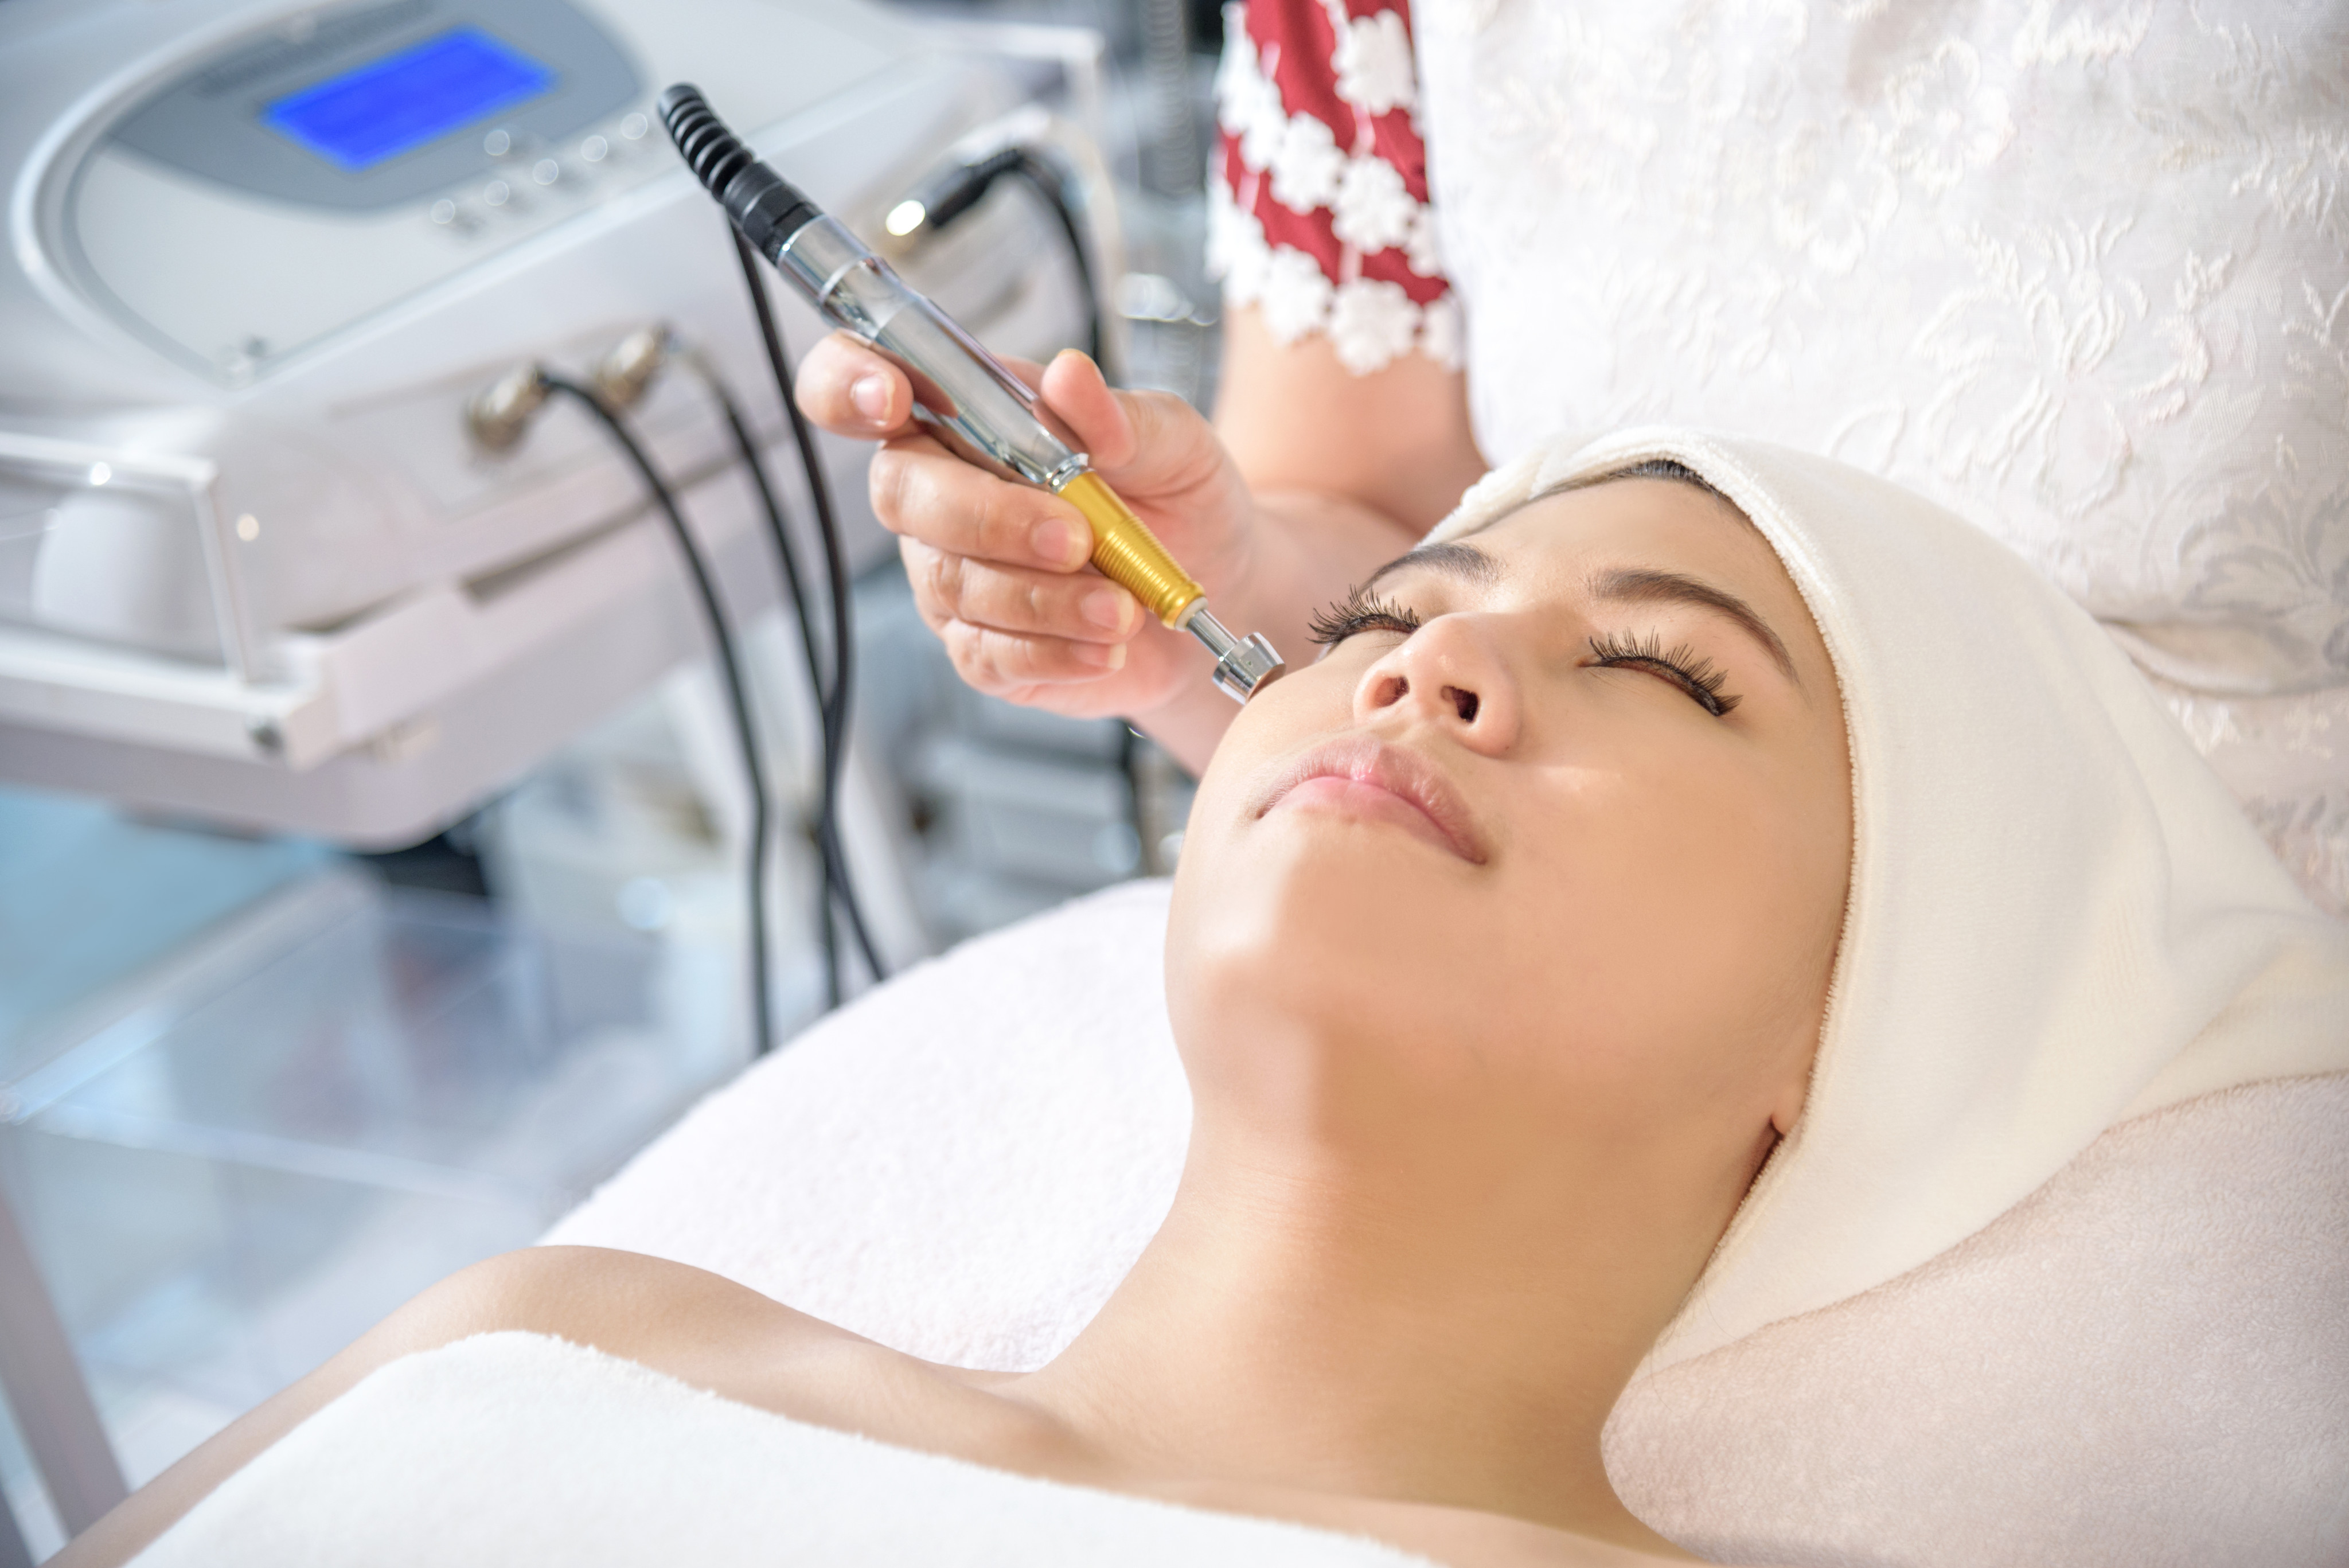 Three women contracted HIV after getting “vampire facial” procedures at an unlicensed medical spa, according to US federal authorities. Stock image: Shutterstock